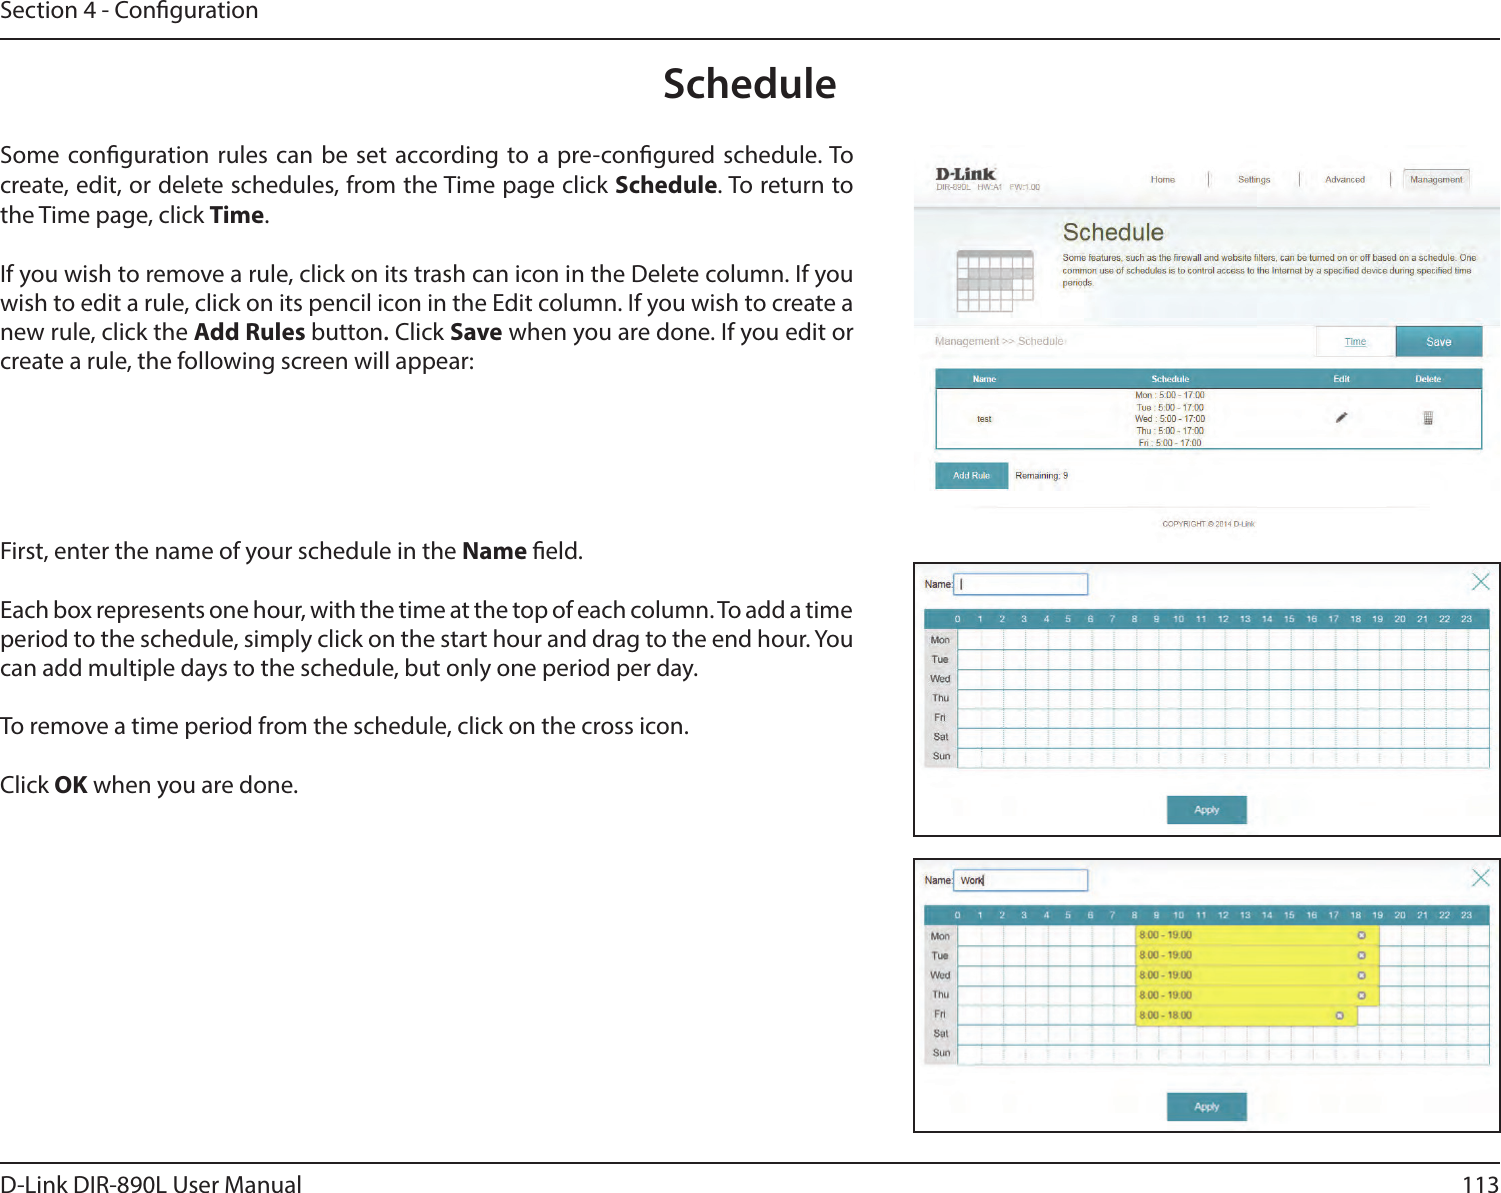 113D-Link DIR-890L User ManualSection 4 - CongurationScheduleSome conguration rules can be set according to a pre-congured schedule. To create, edit, or delete schedules, from the Time page click Schedule. To return to the Time page, click Time. If you wish to remove a rule, click on its trash can icon in the Delete column. If you wish to edit a rule, click on its pencil icon in the Edit column. If you wish to create a new rule, click the Add Rules button. Click Save when you are done. If you edit or create a rule, the following screen will appear:First, enter the name of your schedule in the Name eld.Each box represents one hour, with the time at the top of each column. To add a time period to the schedule, simply click on the start hour and drag to the end hour. You can add multiple days to the schedule, but only one period per day.To remove a time period from the schedule, click on the cross icon.Click OK when you are done.